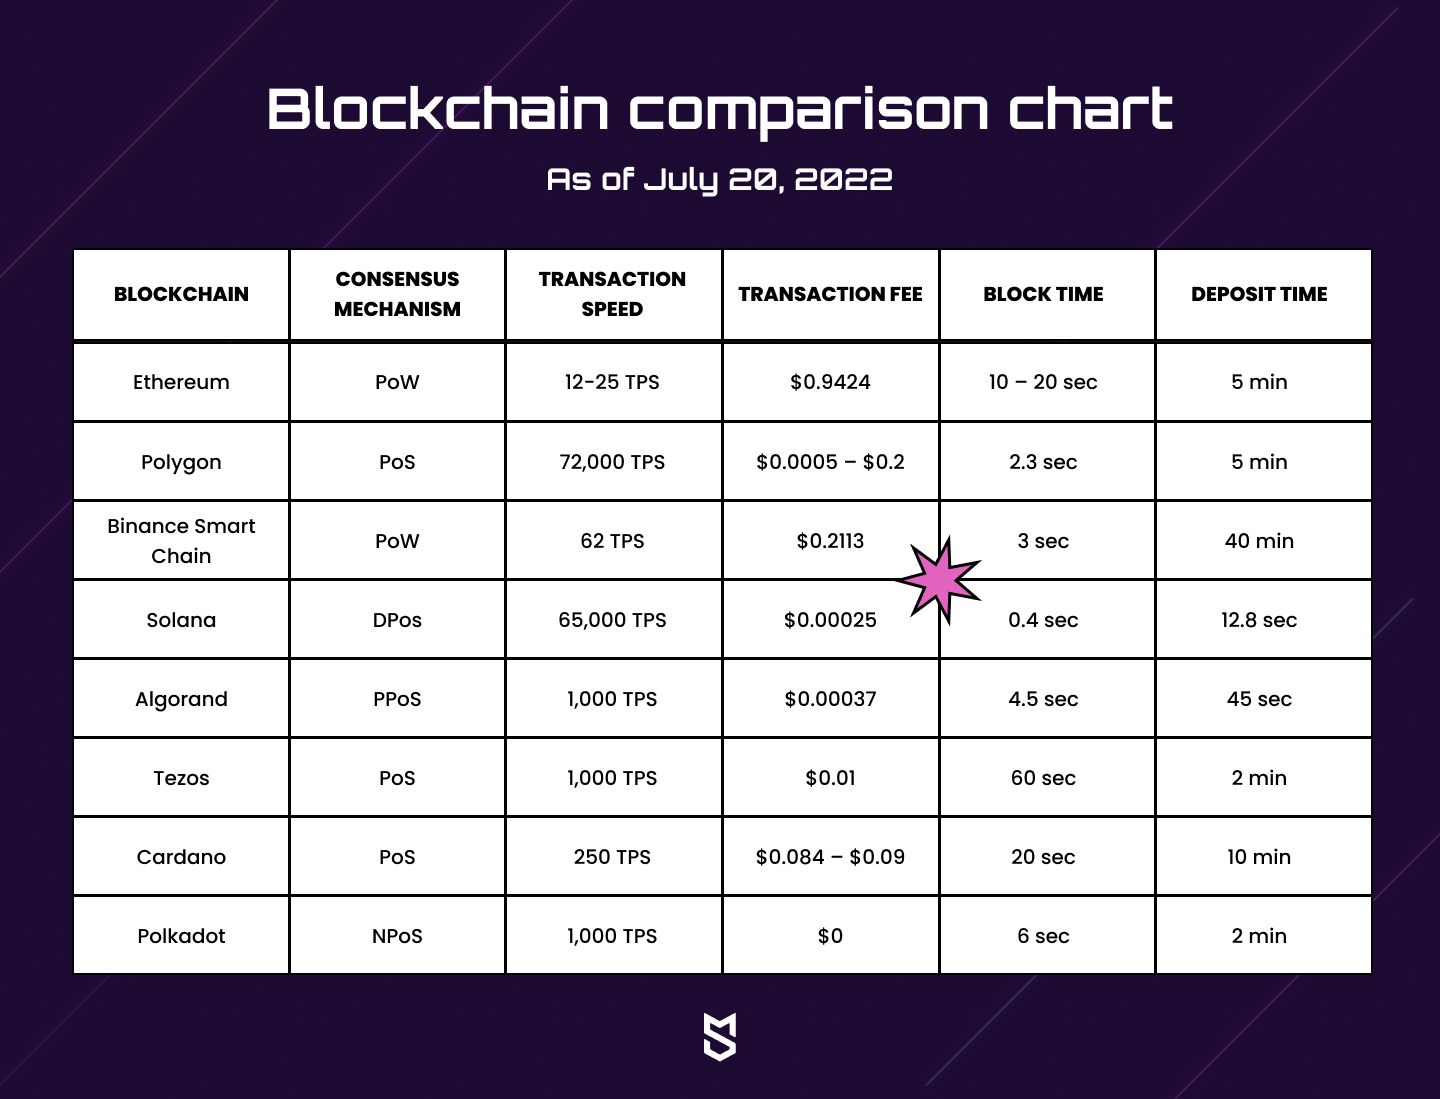 Blockchain comparison chart as of July 20, 2022